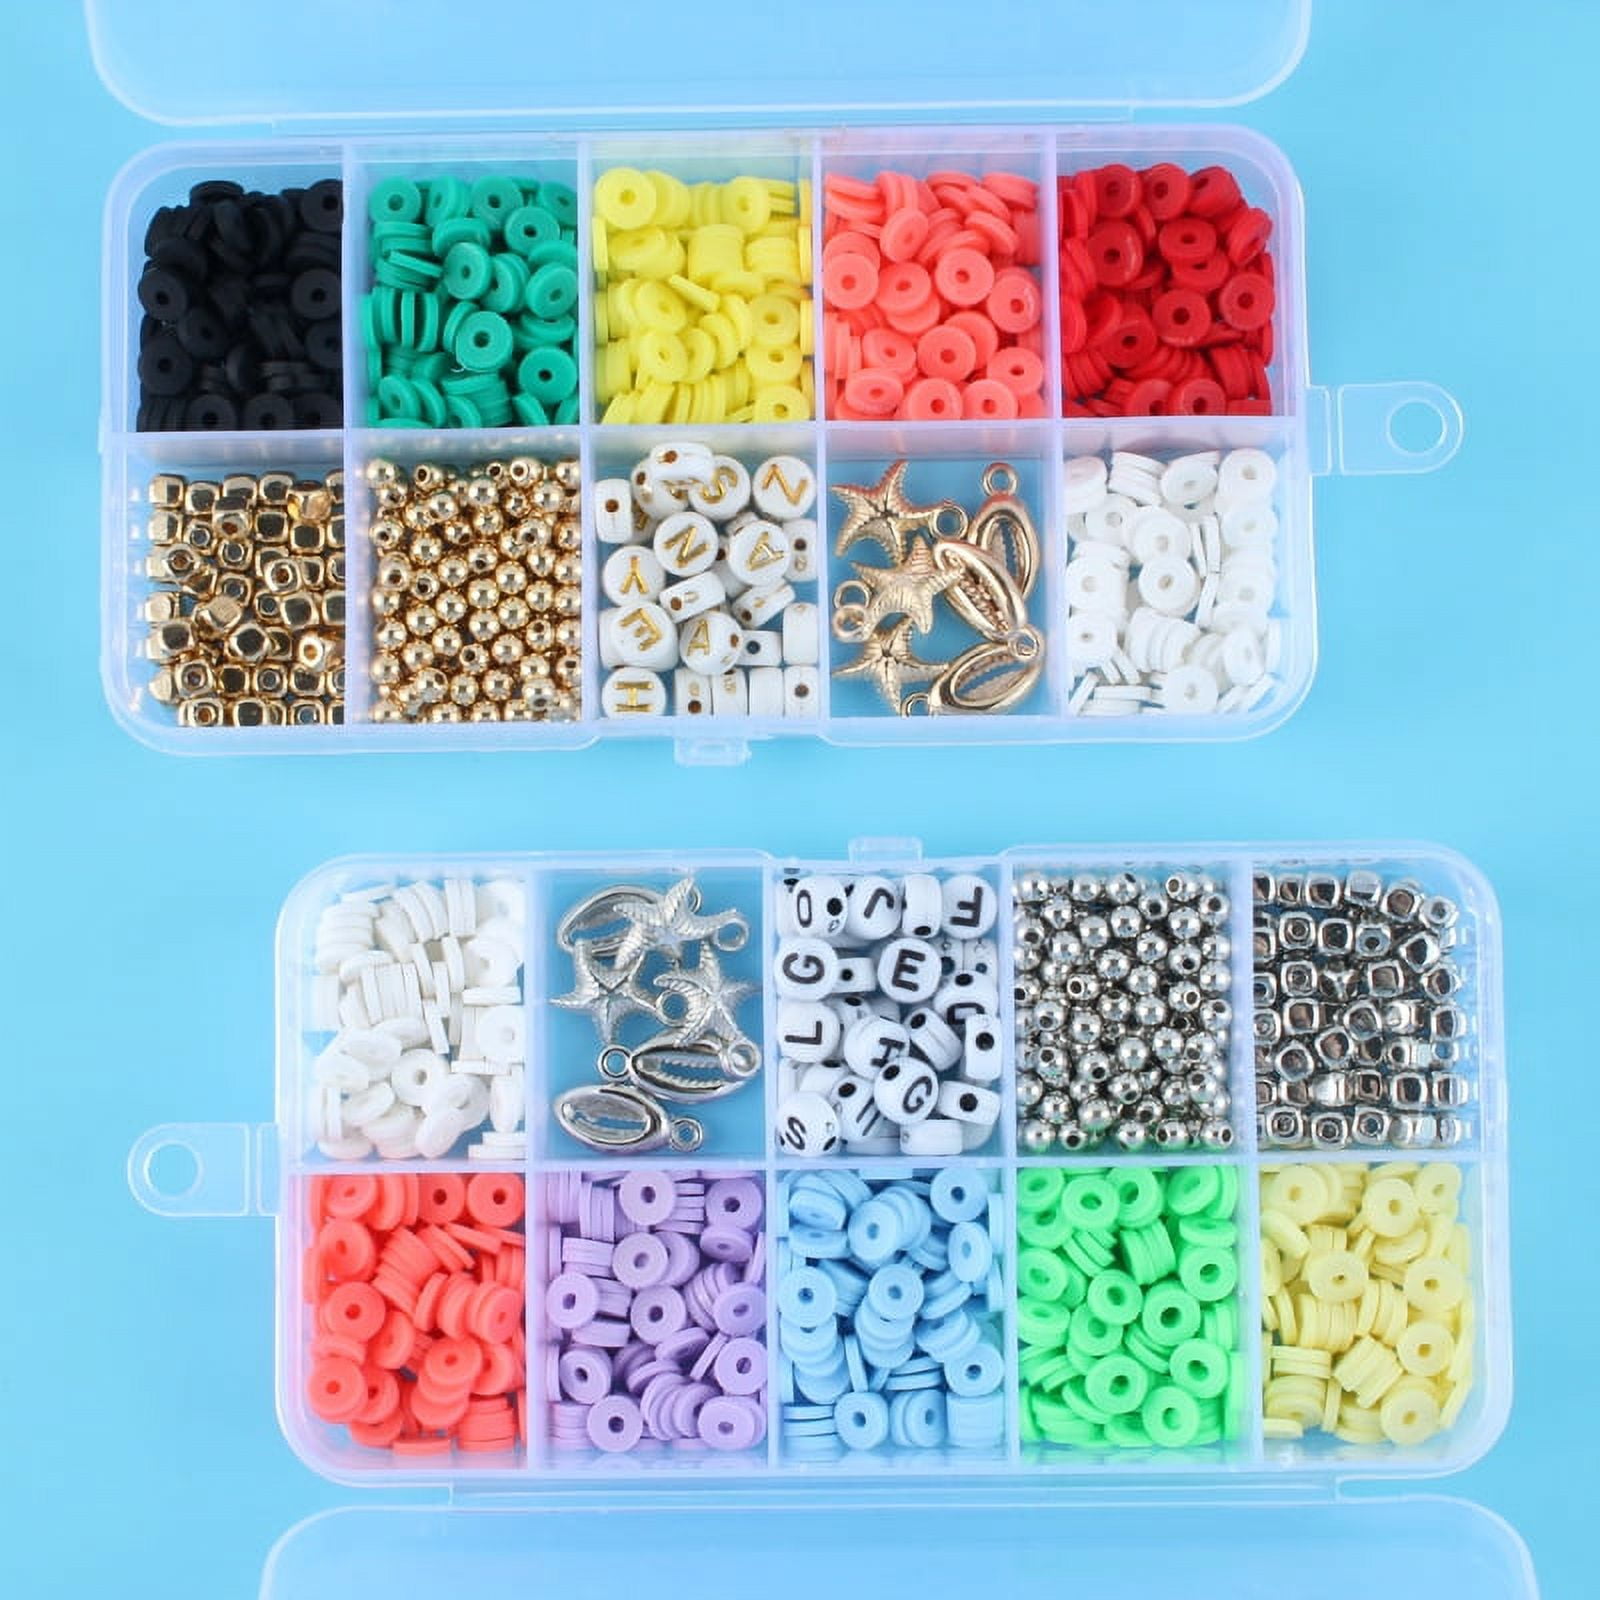  Clay Beads Bracelet Making Kit by Box-O-Beads, 6000 pcs Polymer  Clay Heishi Beads for Bracelet & Jewelry Making, DIY Bracelet Making Kit  for Kids & Teens Ages 8-12, 24 Color Rainbow